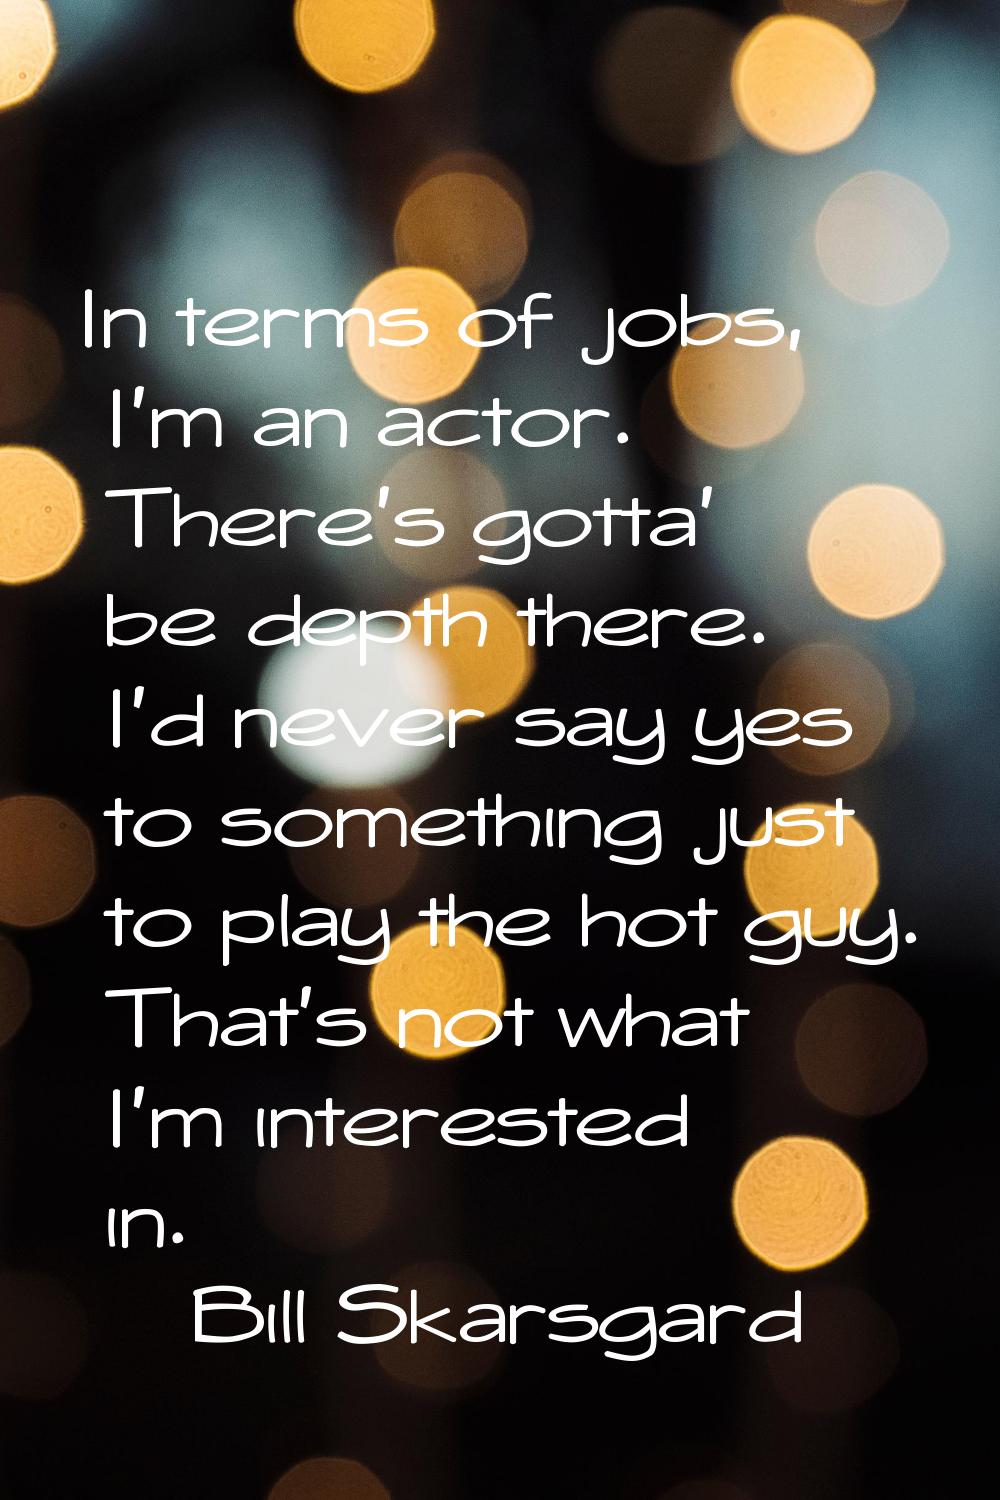 In terms of jobs, I'm an actor. There's gotta' be depth there. I'd never say yes to something just 